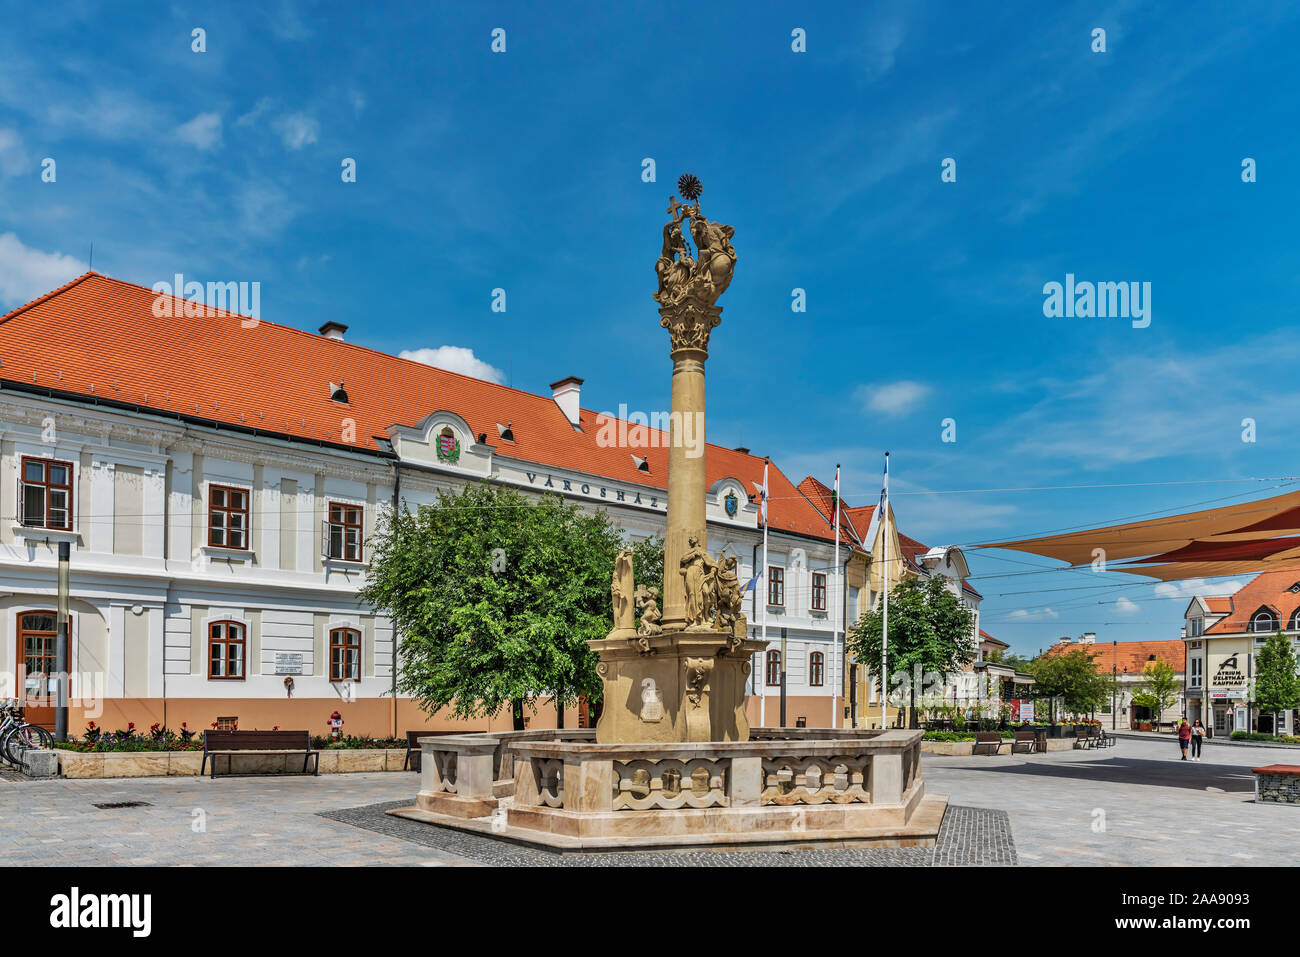 Trinity Column in Baroque style was built in 1770. It is located in the main square Fo Ter in Keszthely, Zala county, Western Transdanubia, Hungary Stock Photo